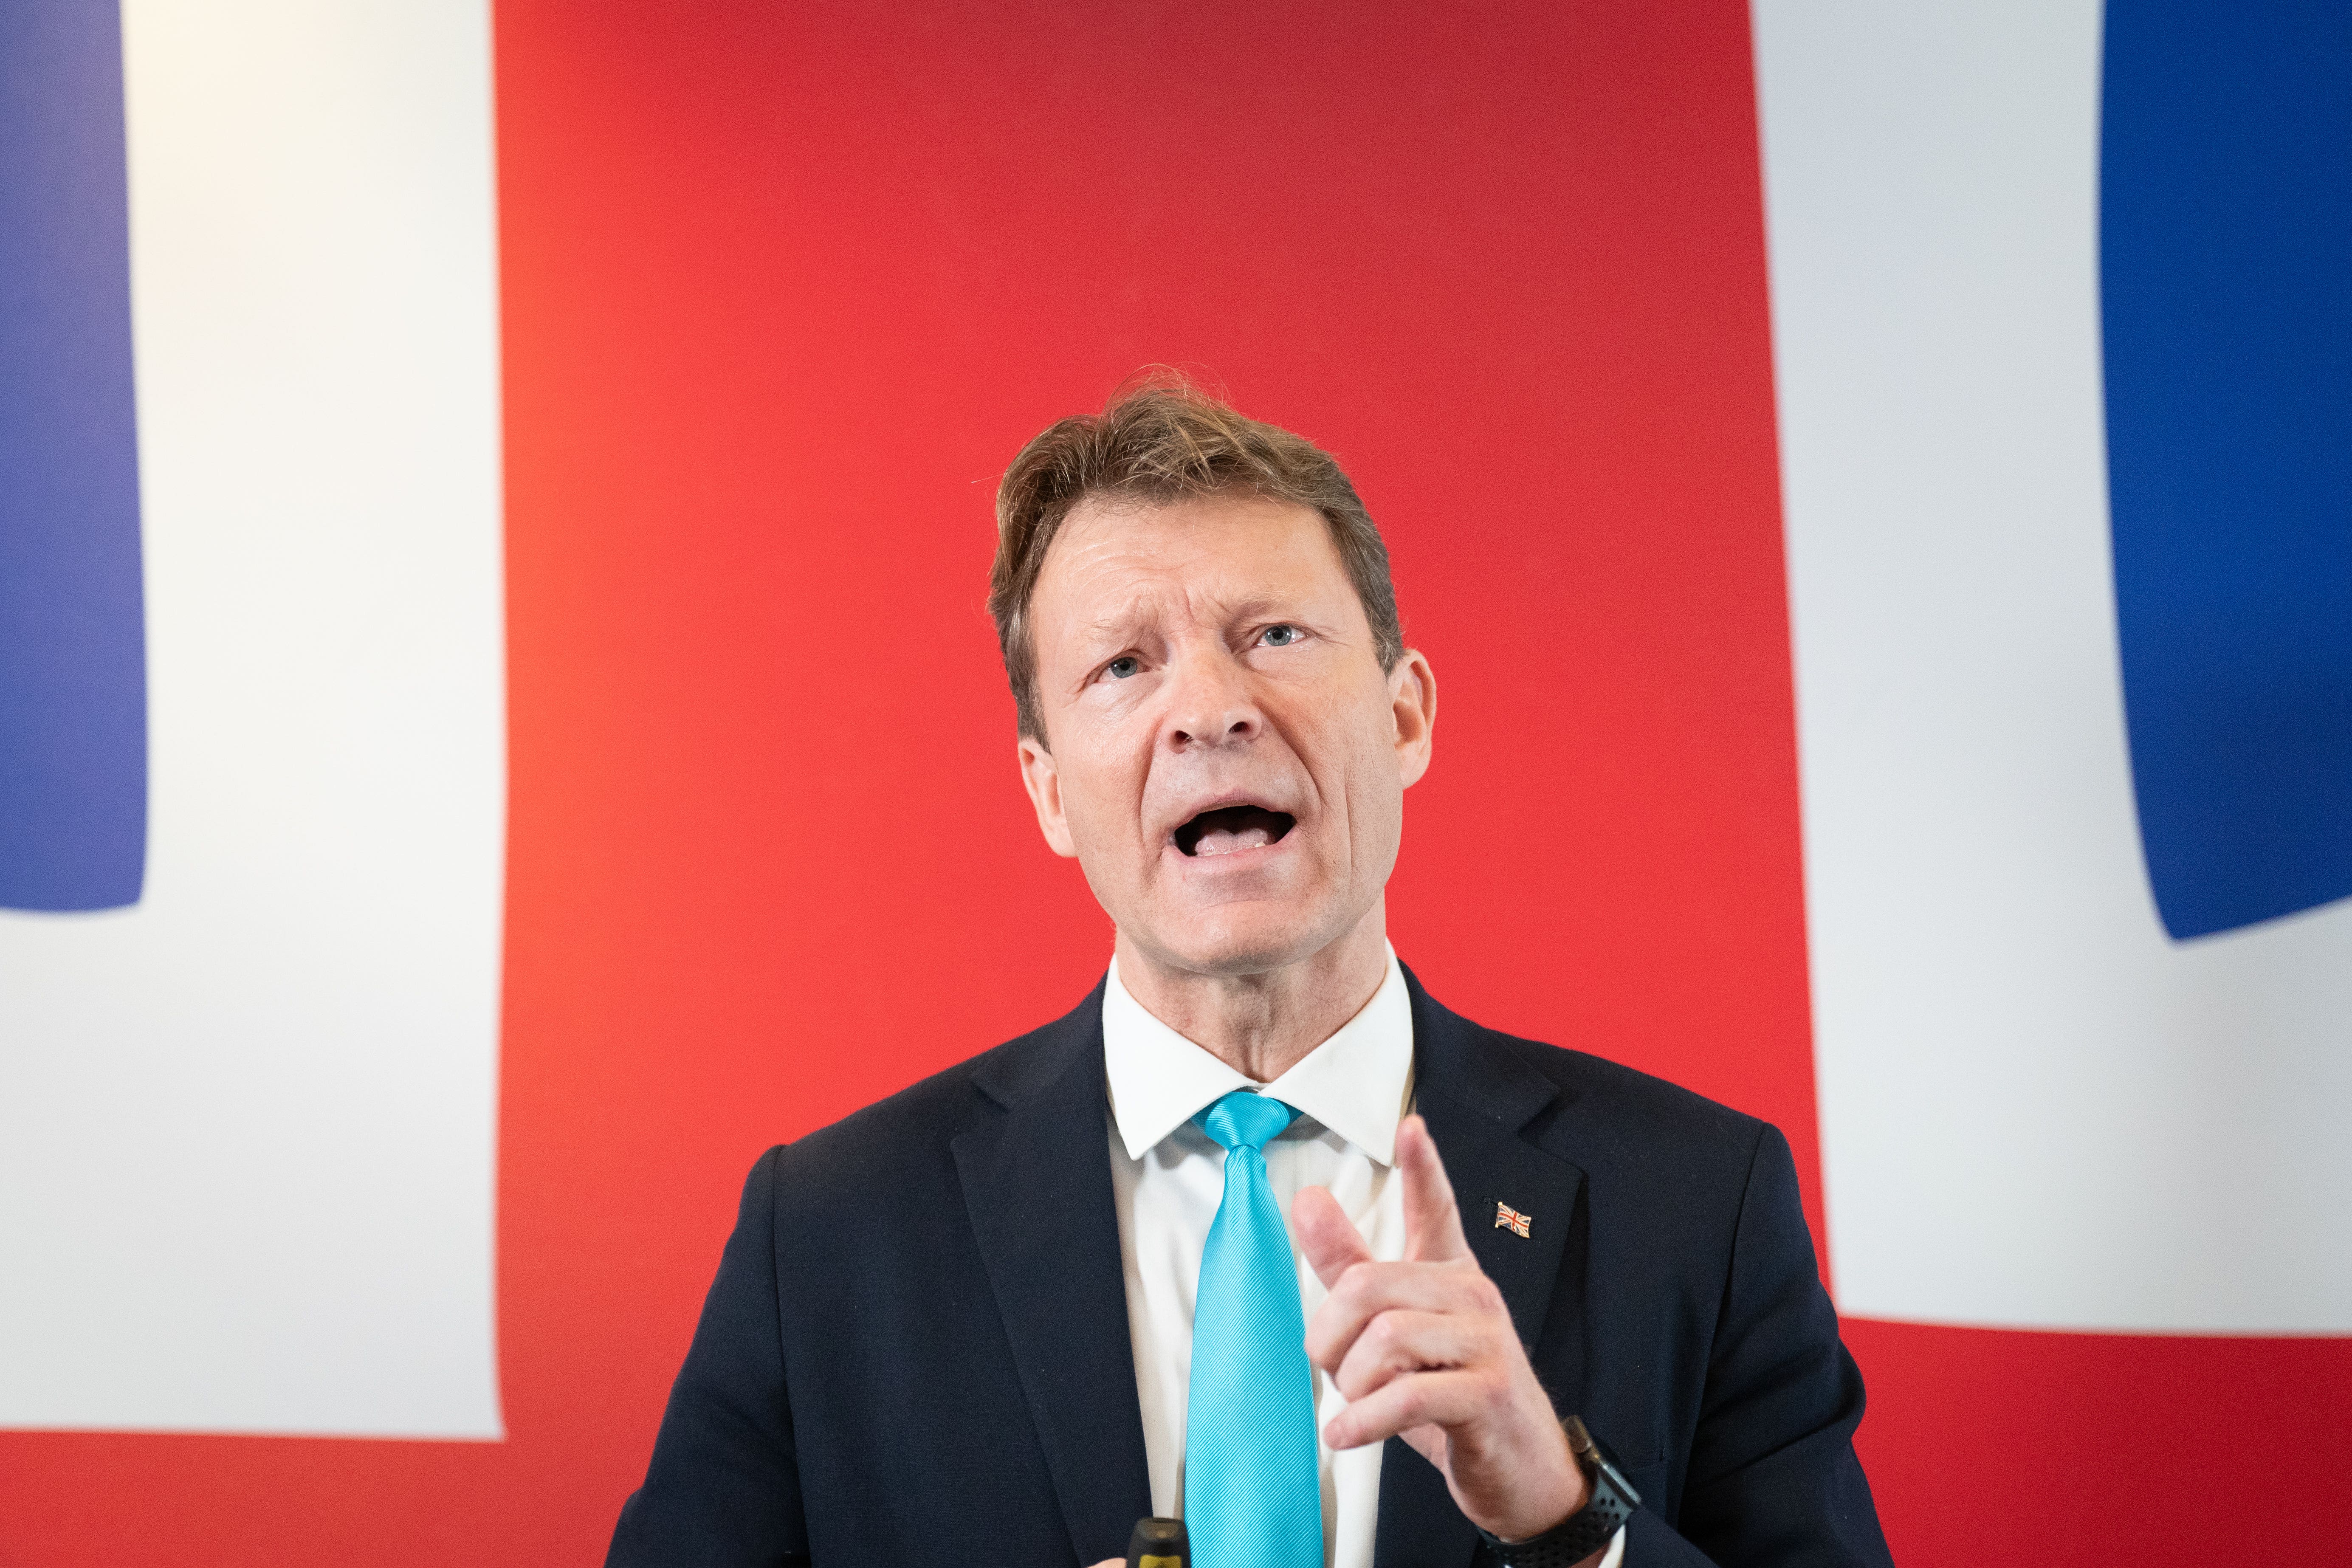 Reform Party leader Richard Tice has accused the Tories of ‘breaking’ Britain